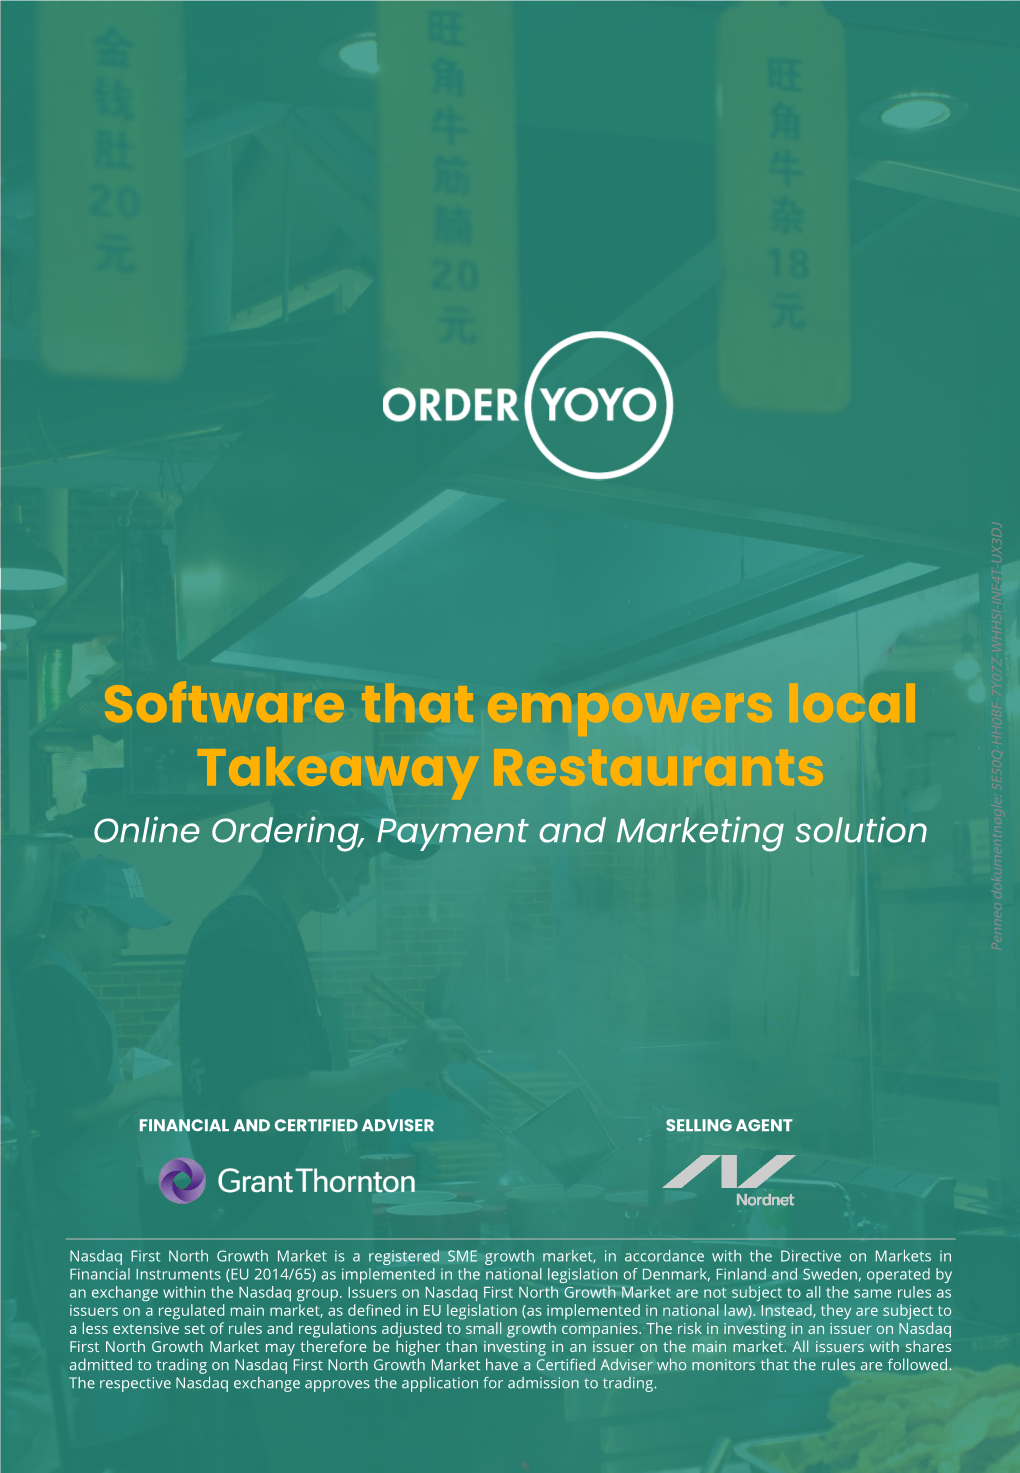 Software That Empowers Local Takeaway Restaurants Online Ordering, Payment and Marketing Solution Penneo Dokumentnøgle: 5E50Q-HH0BF-7Y07Z-WHHSI-INE4T-UX3DJ